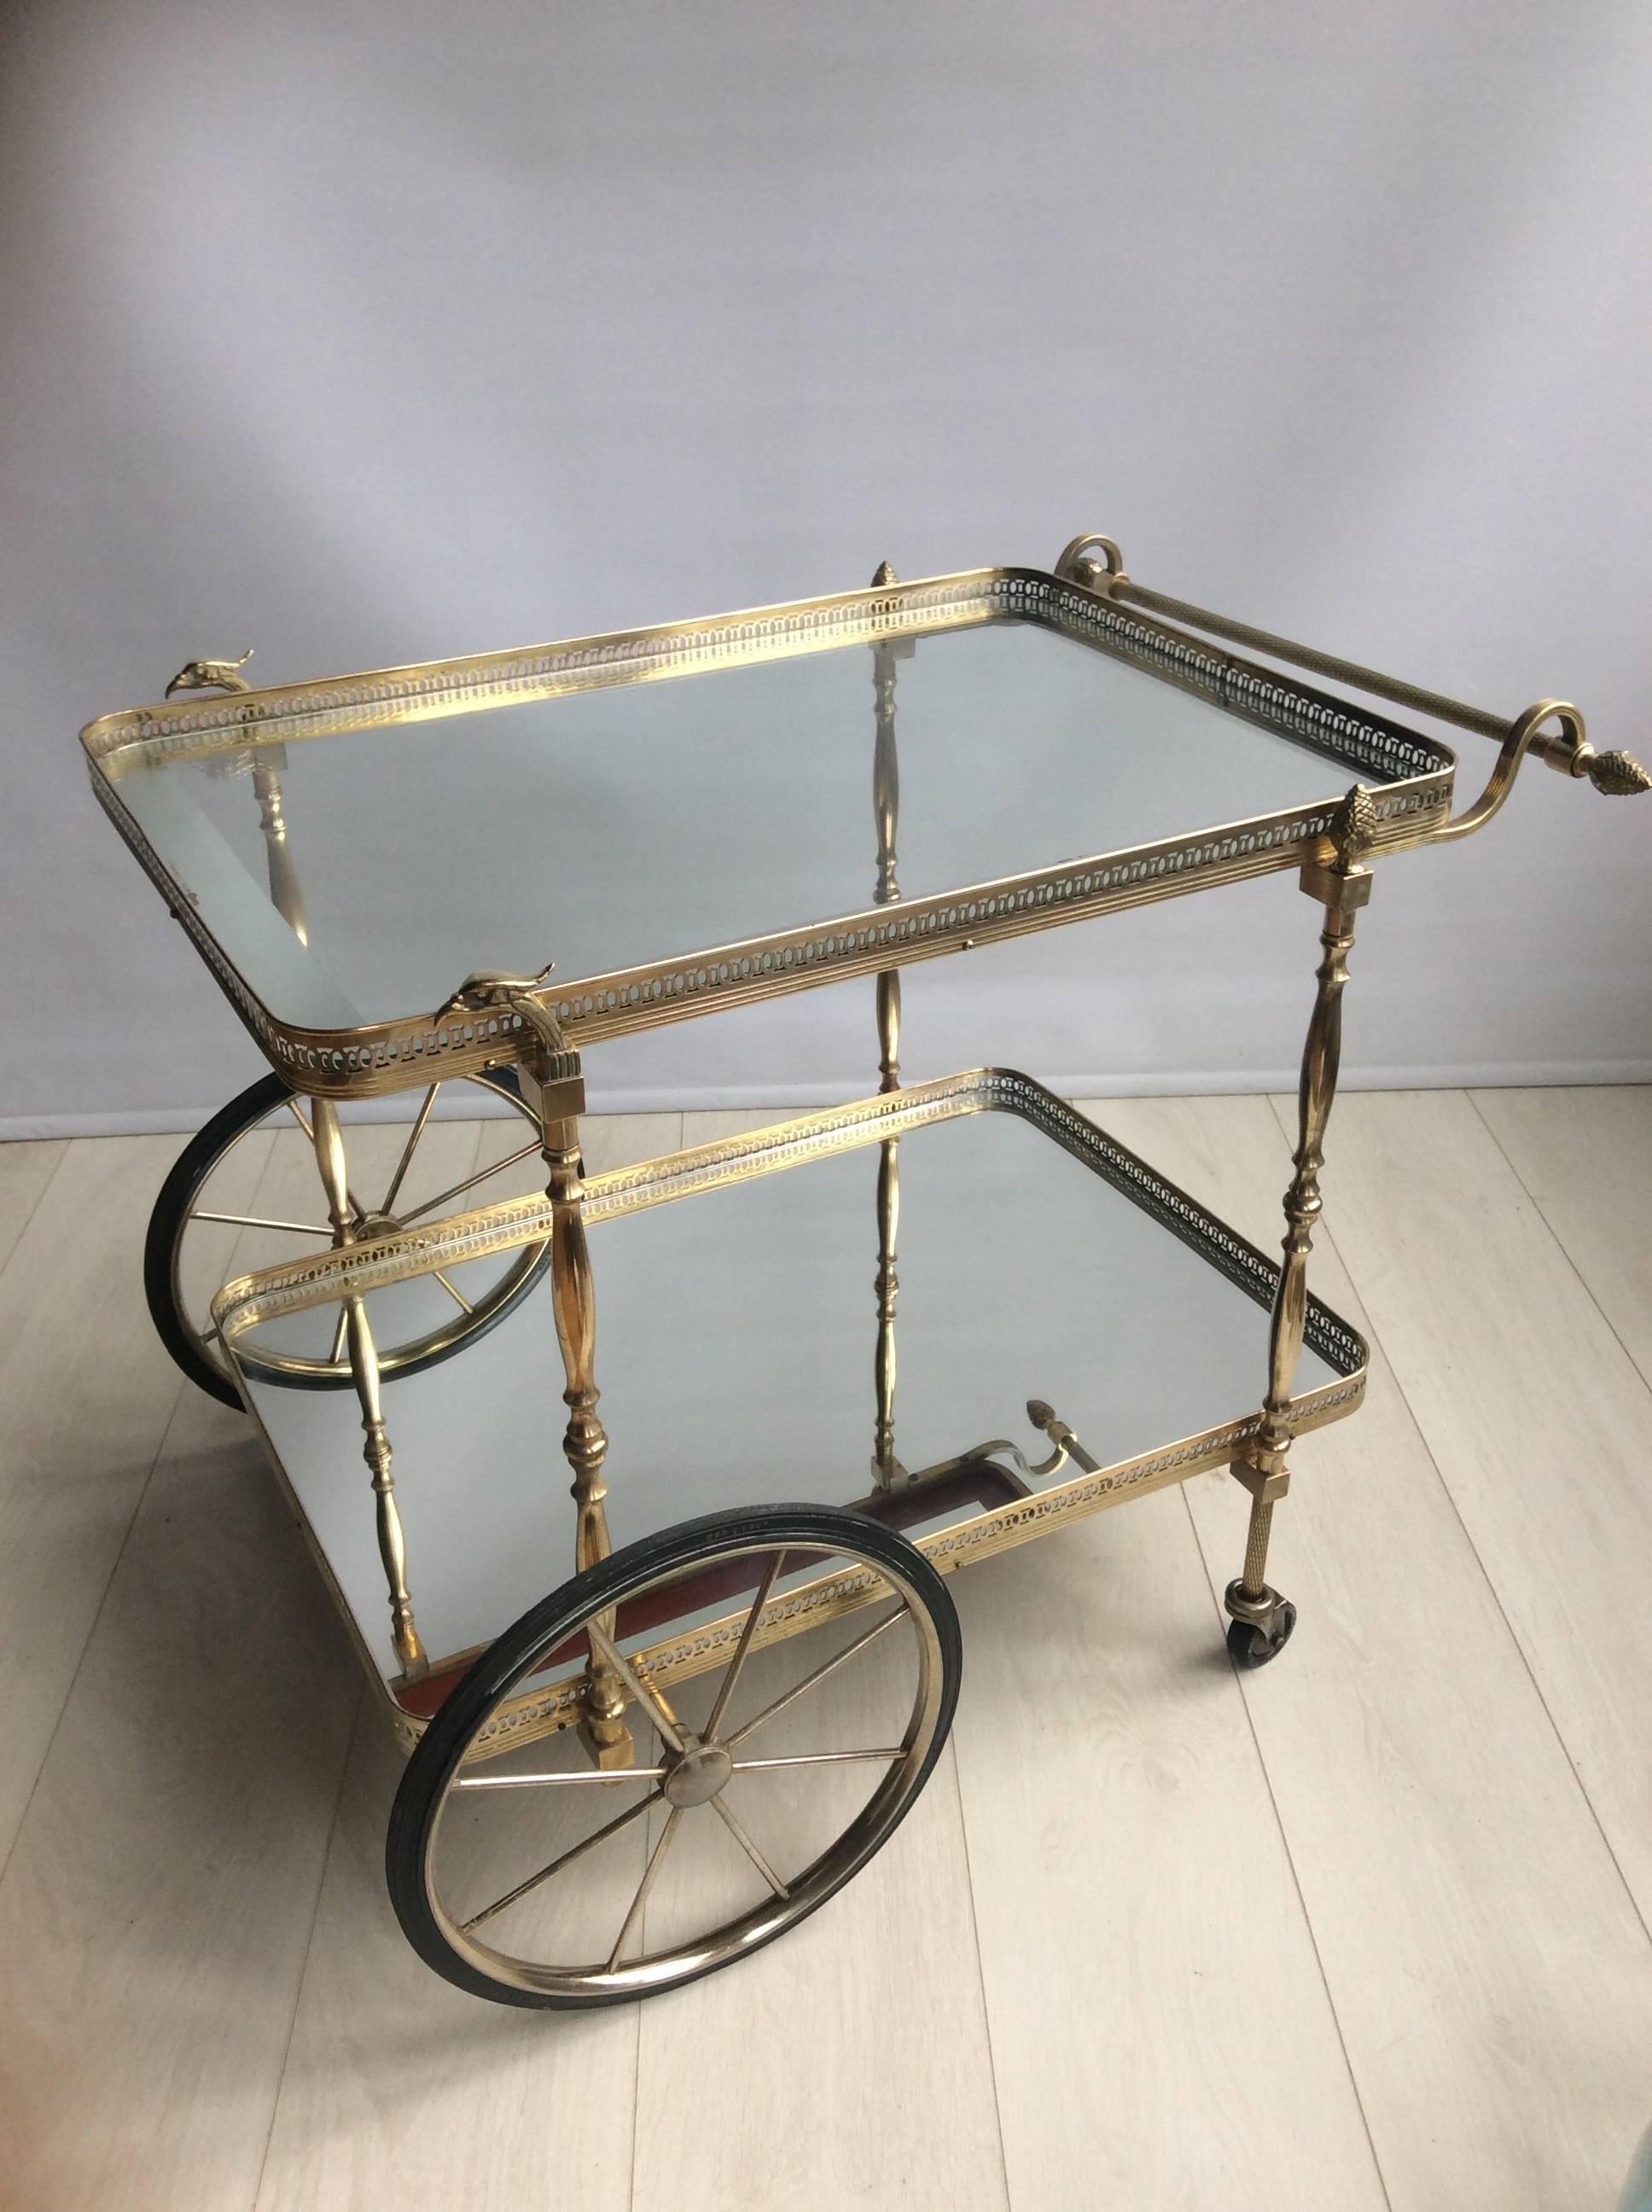 20th Century Decorative French Brass Drinks Trolley or Bar Cart